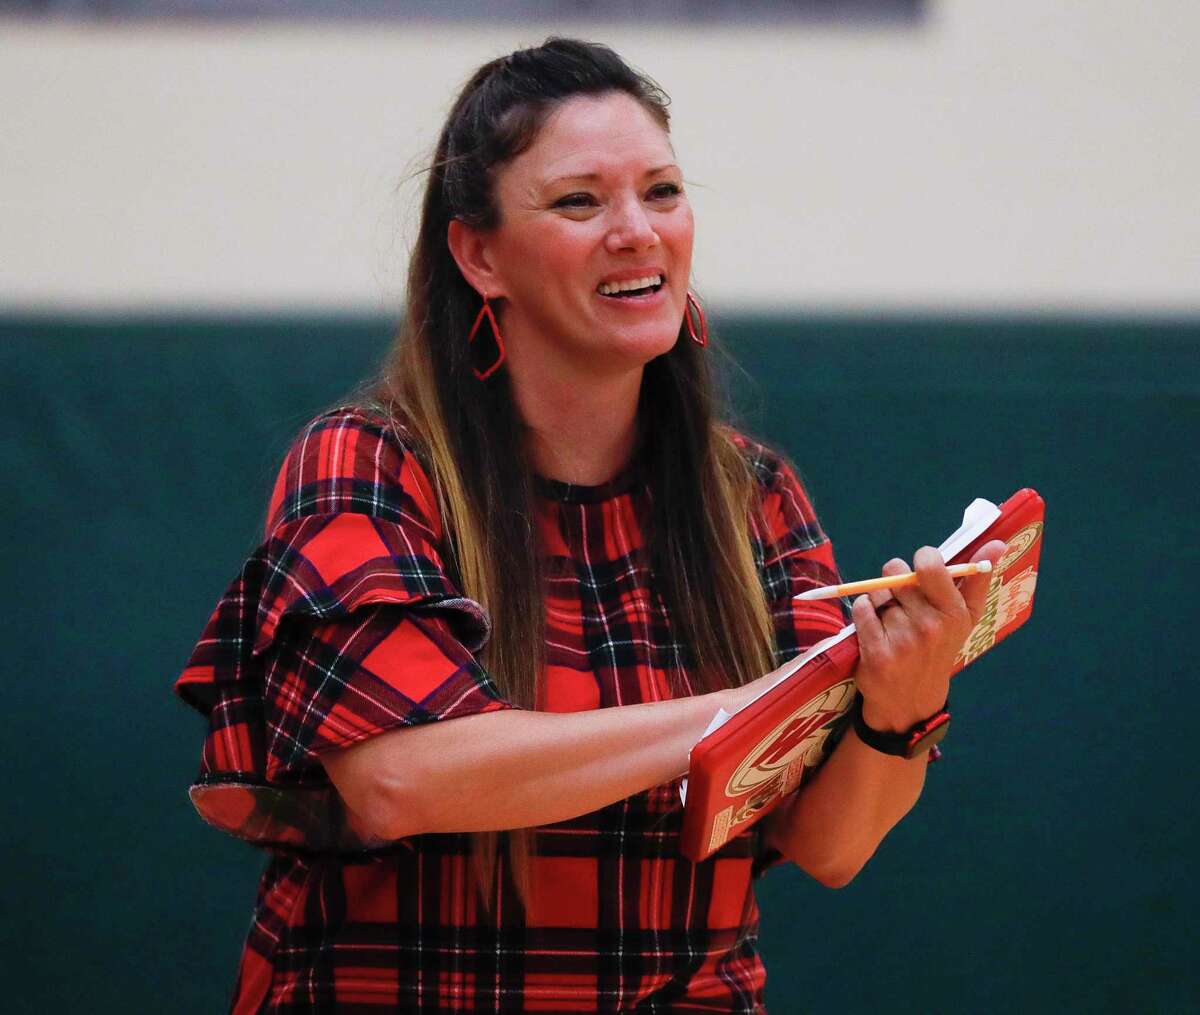 The Woodlands head coach Terri Wade is seen during the first set of a high school volleyball match at The Woodlands High School, Tuesday, Sept. 28, 2021, in The Woodlands.